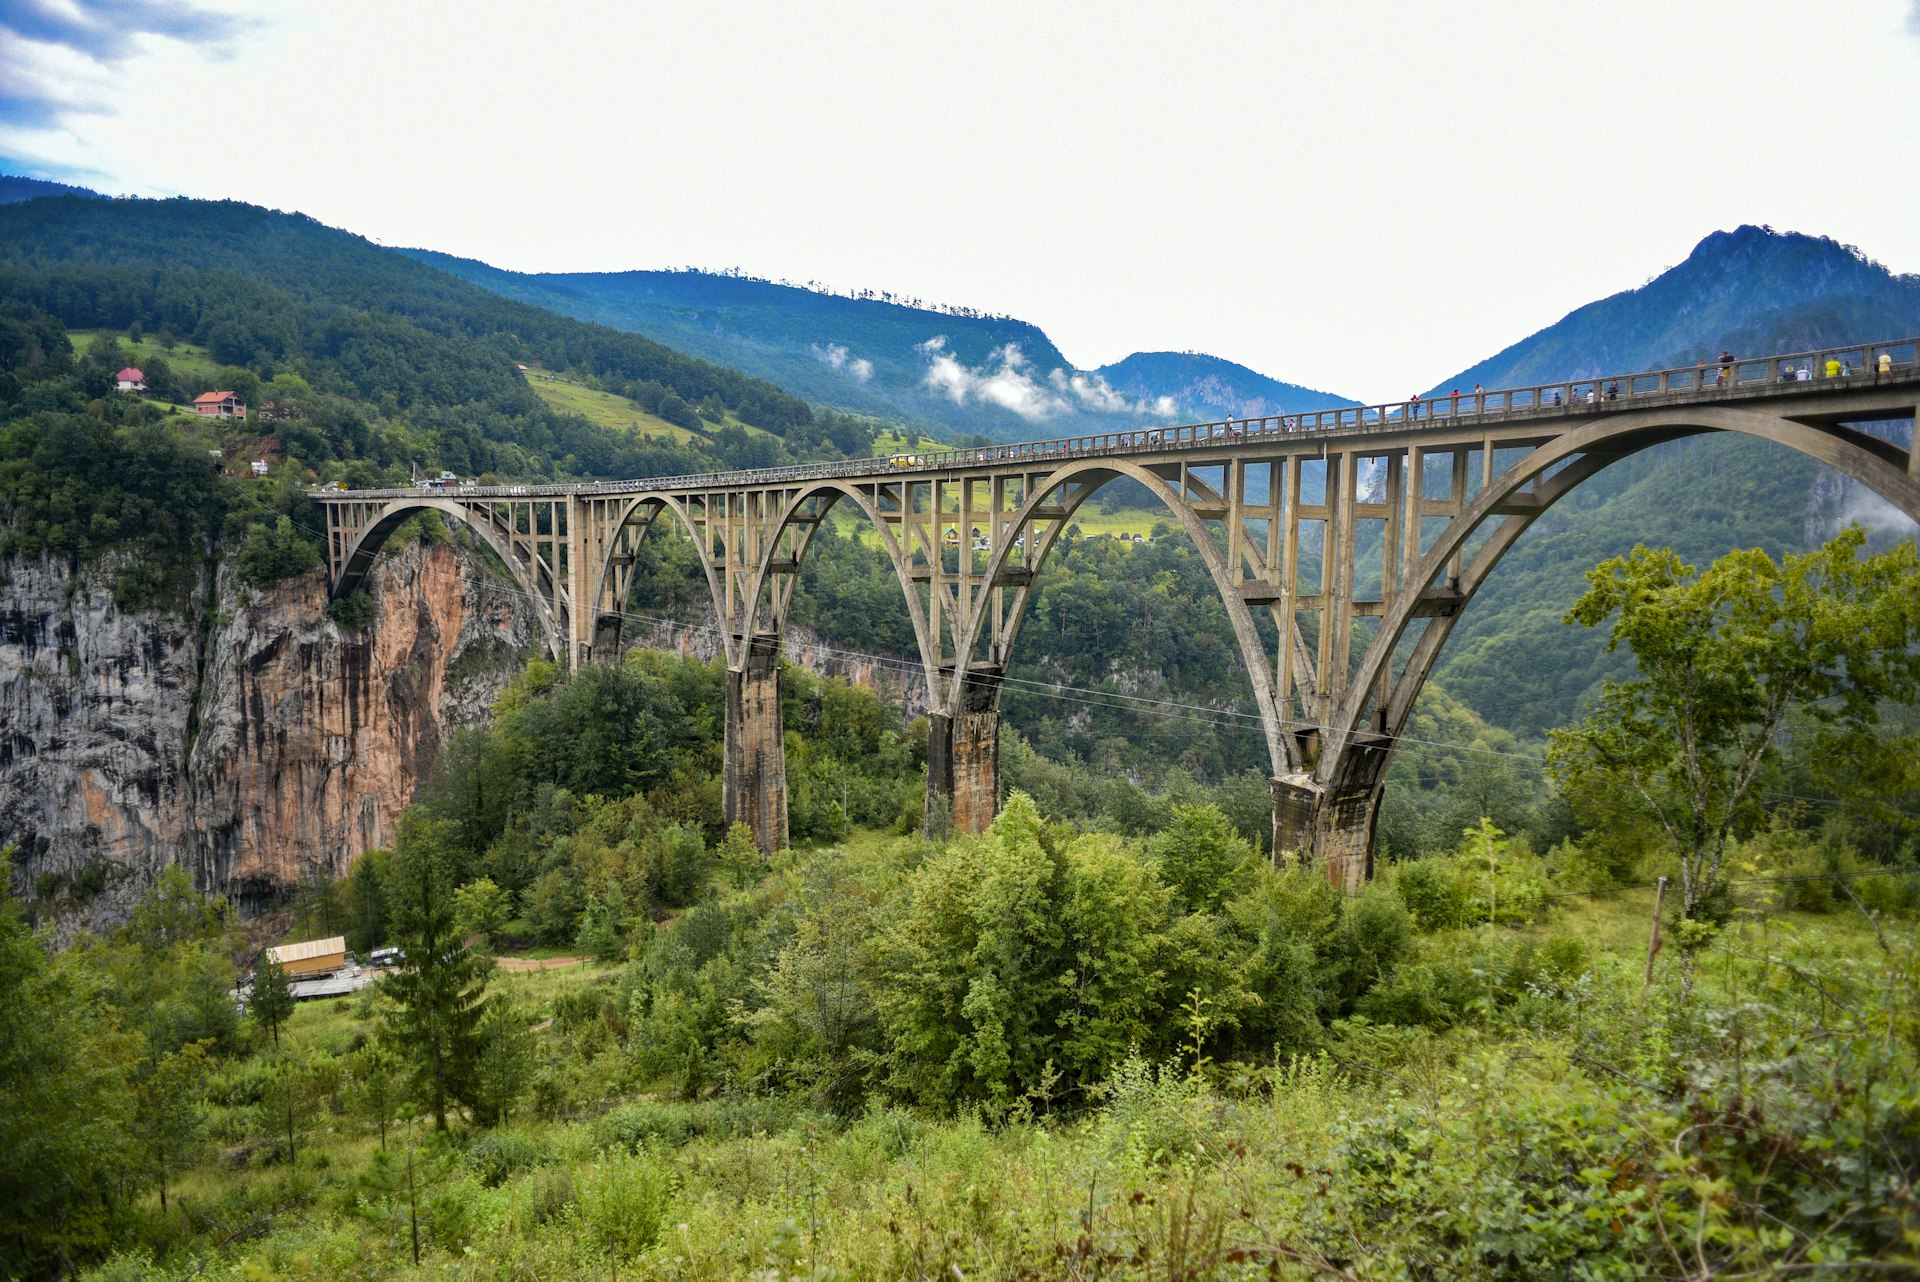 People walk over a multi-arched bridge spanning a gorge in a mountainous area